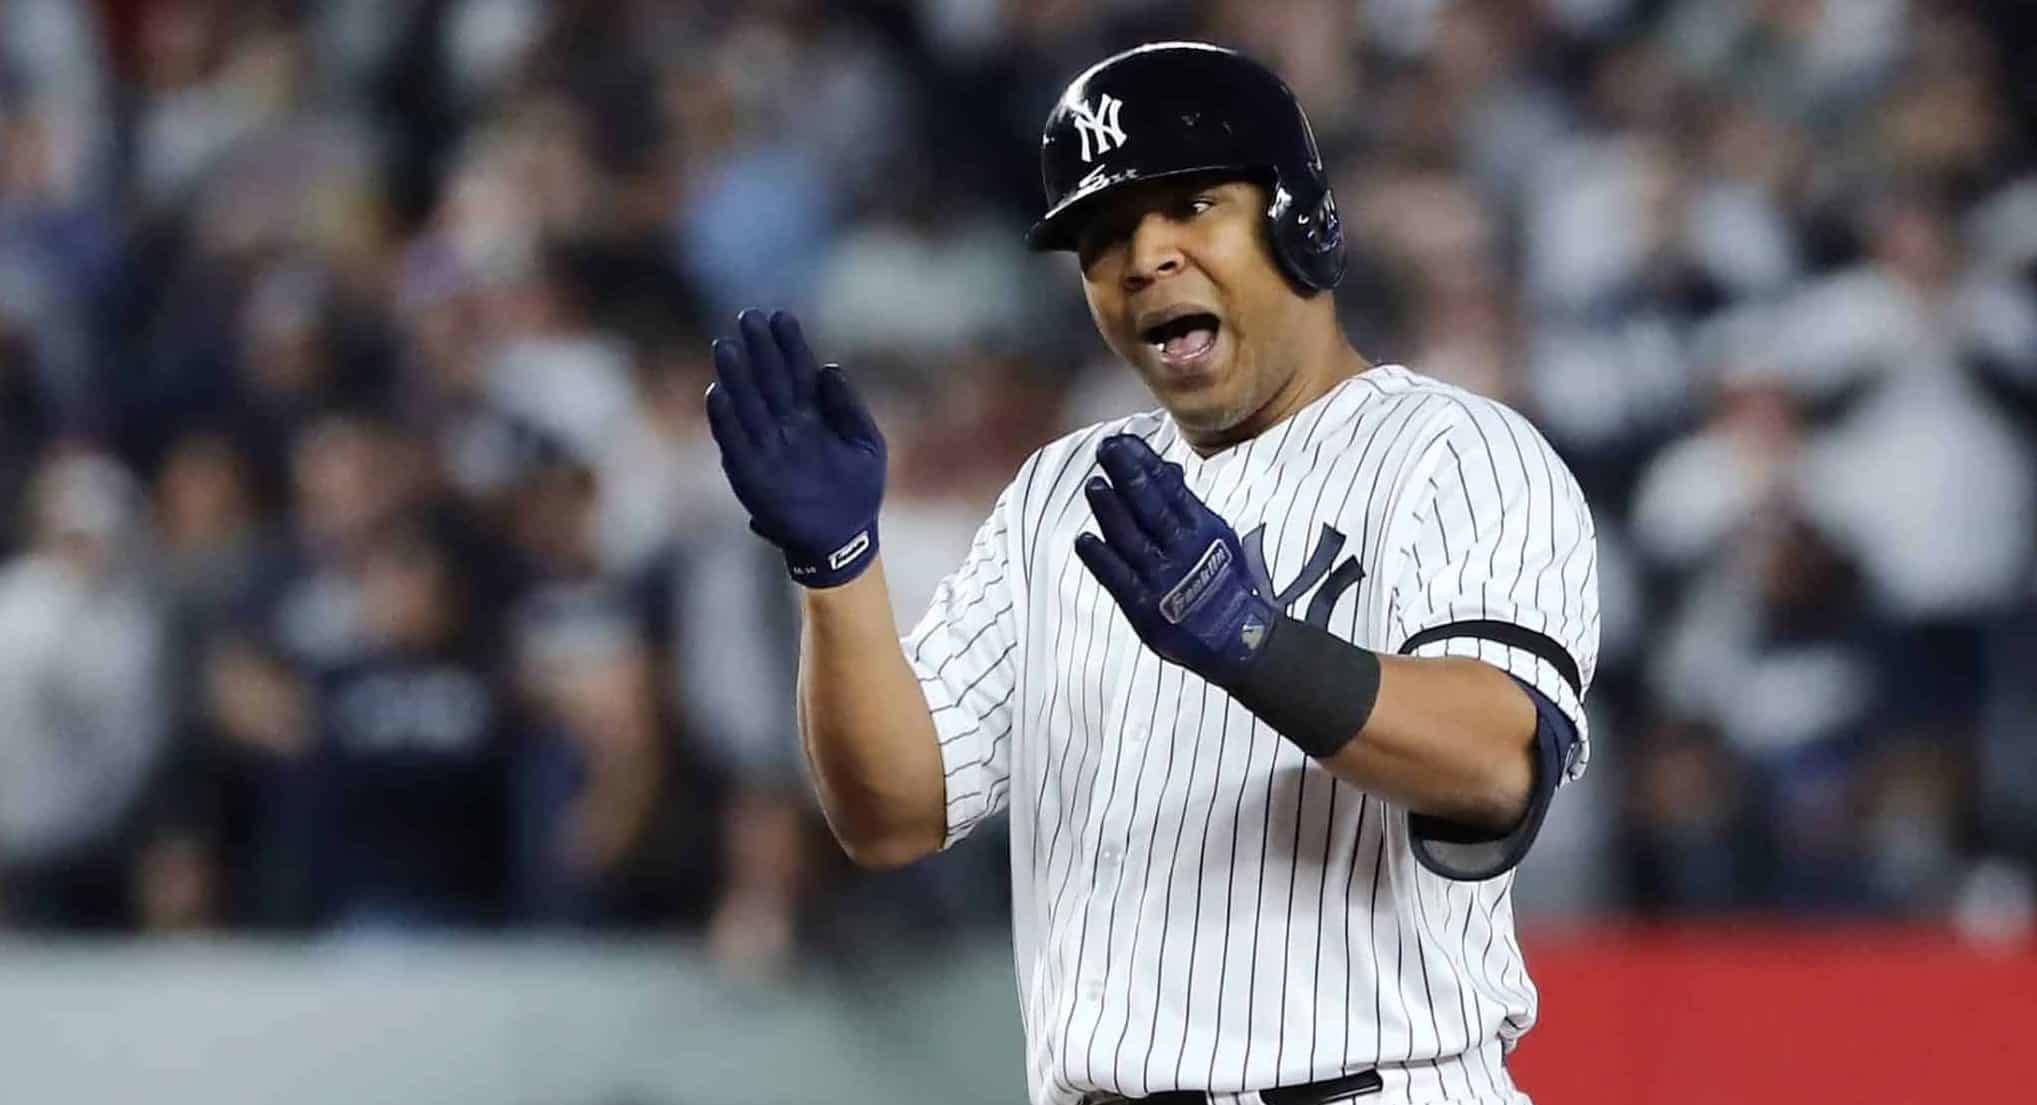 NEW YORK, NEW YORK - OCTOBER 15: Edwin Encarnacion #30 of the New York Yankees celebrates hitting a double during the fifth inning against the Houston Astros in game three of the American League Championship Series at Yankee Stadium on October 15, 2019 in New York City.